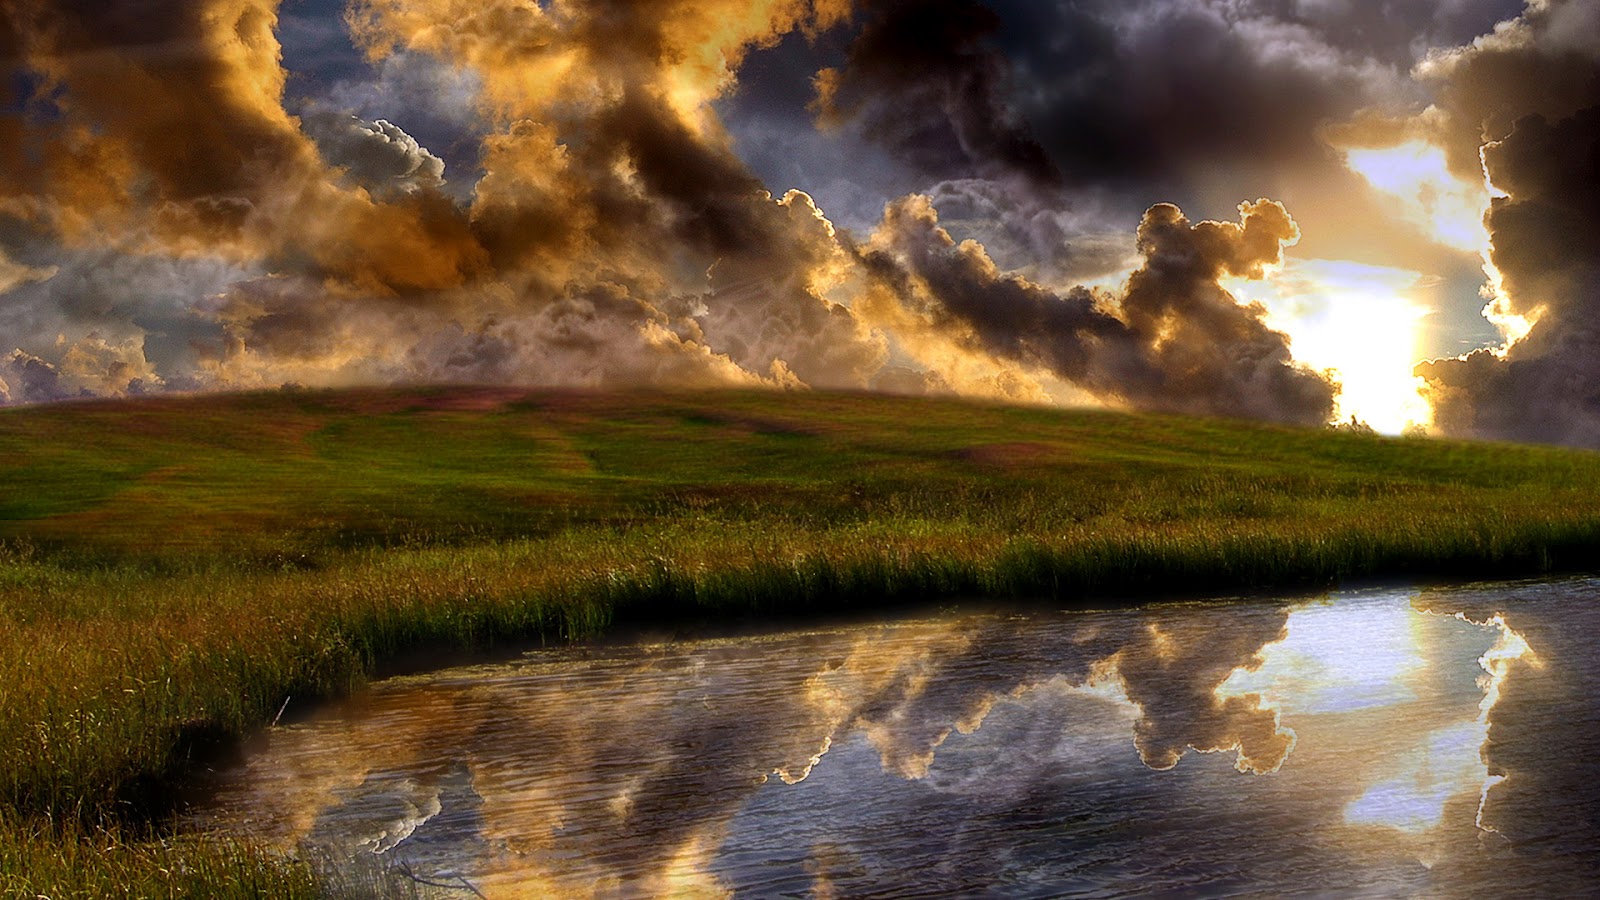 full resolution wallpapers,sky,nature,natural landscape,reflection,cloud